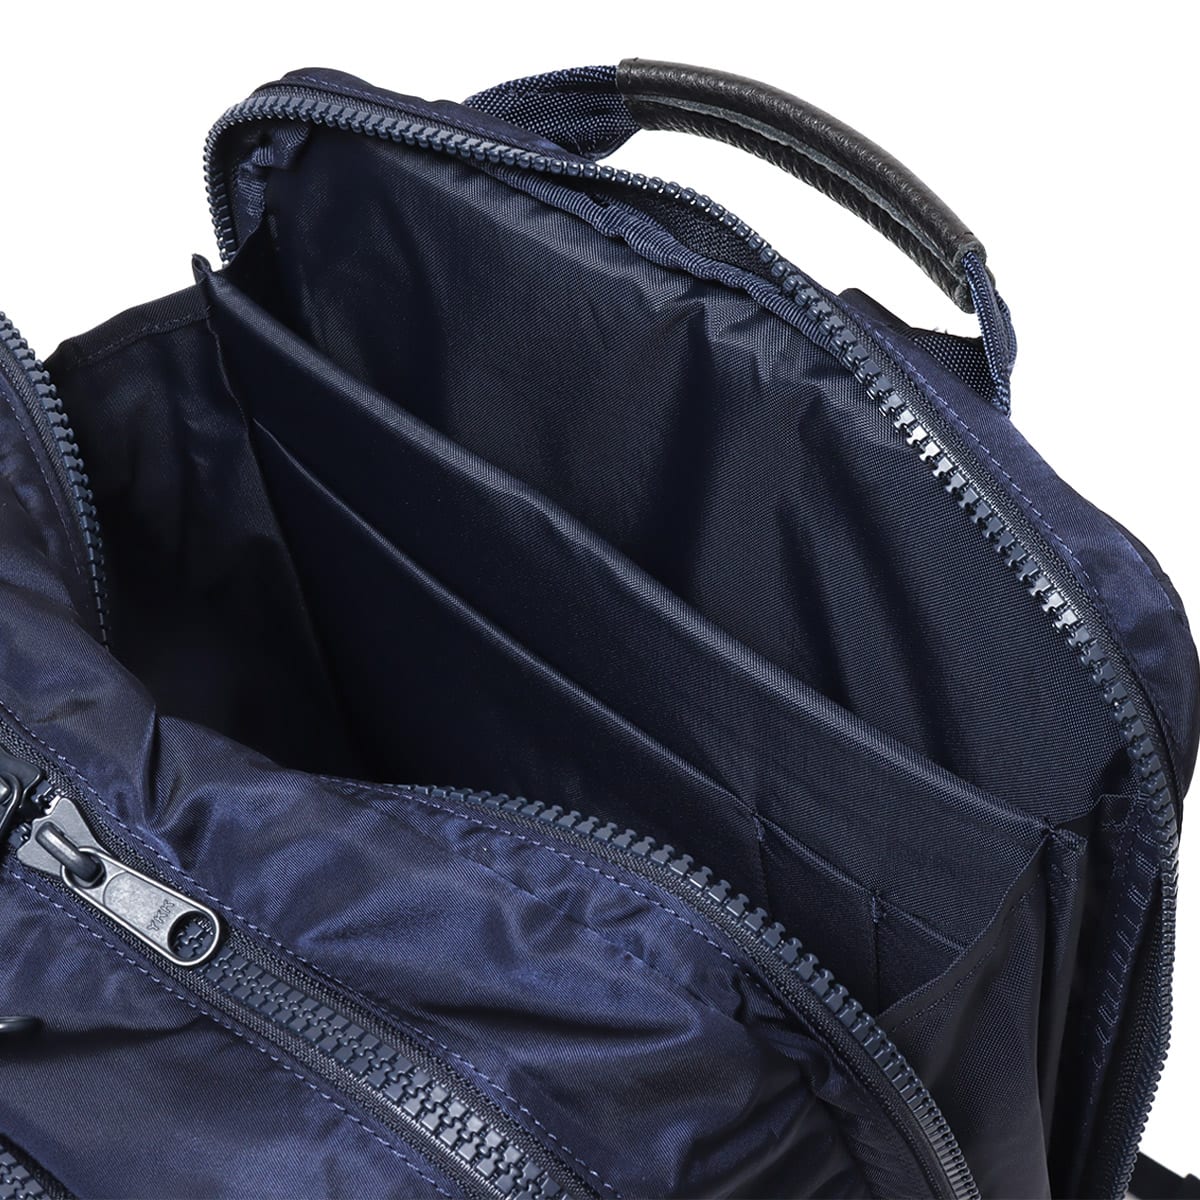 THE NORTH FACE LIMONTA Day Pack Navy写真撮影のために開封致しました